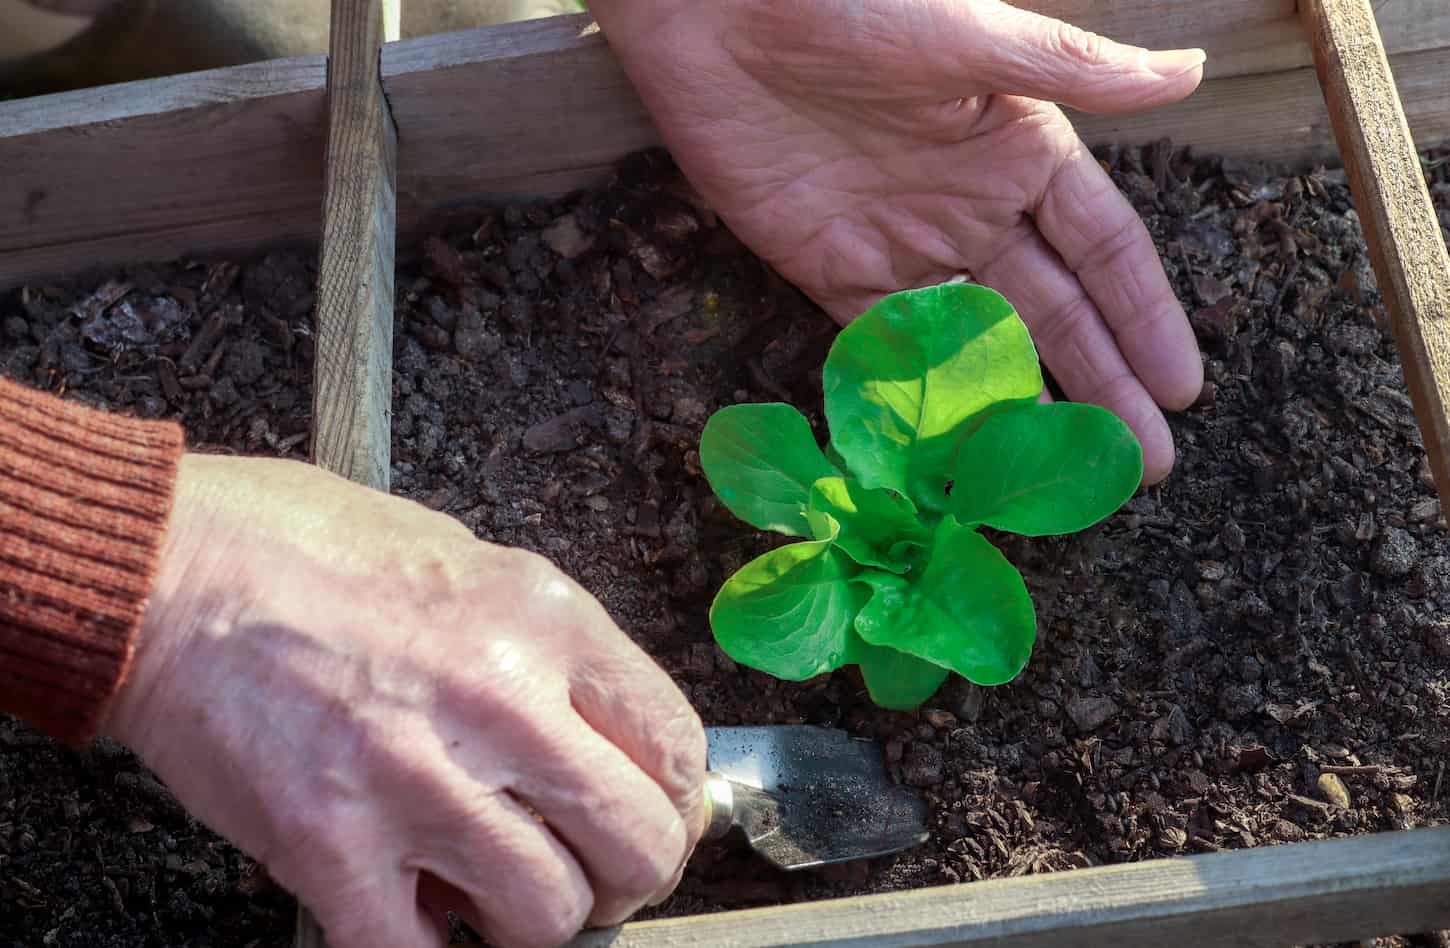 An image of a man's hands planting young fresh green sprouts of lettuce salad in the garden.